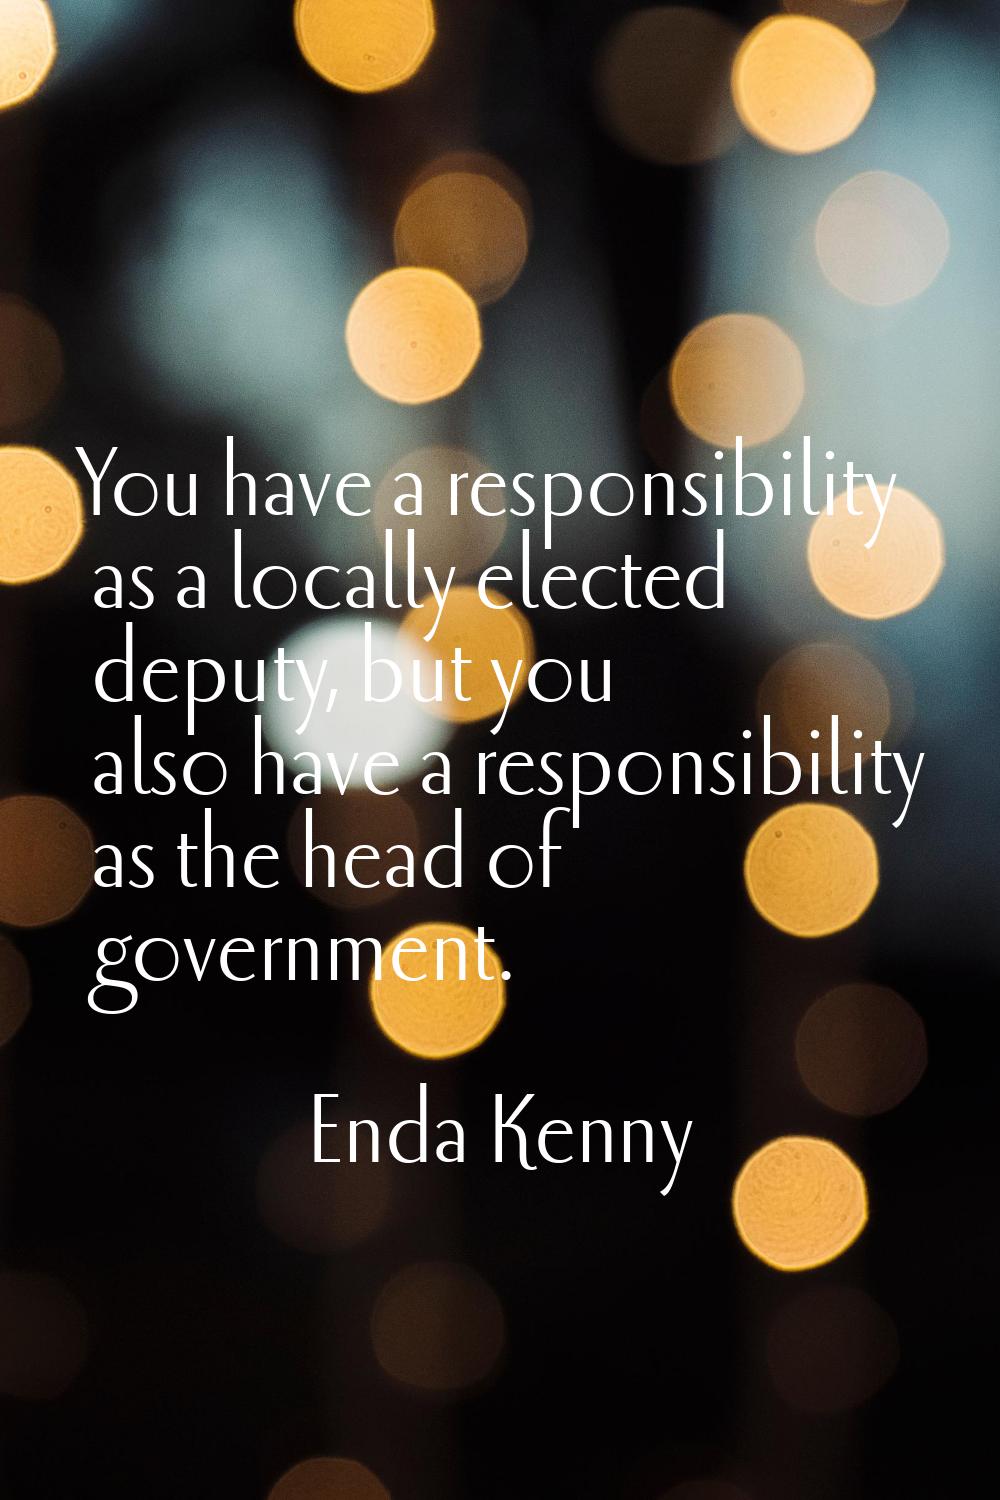 You have a responsibility as a locally elected deputy, but you also have a responsibility as the he